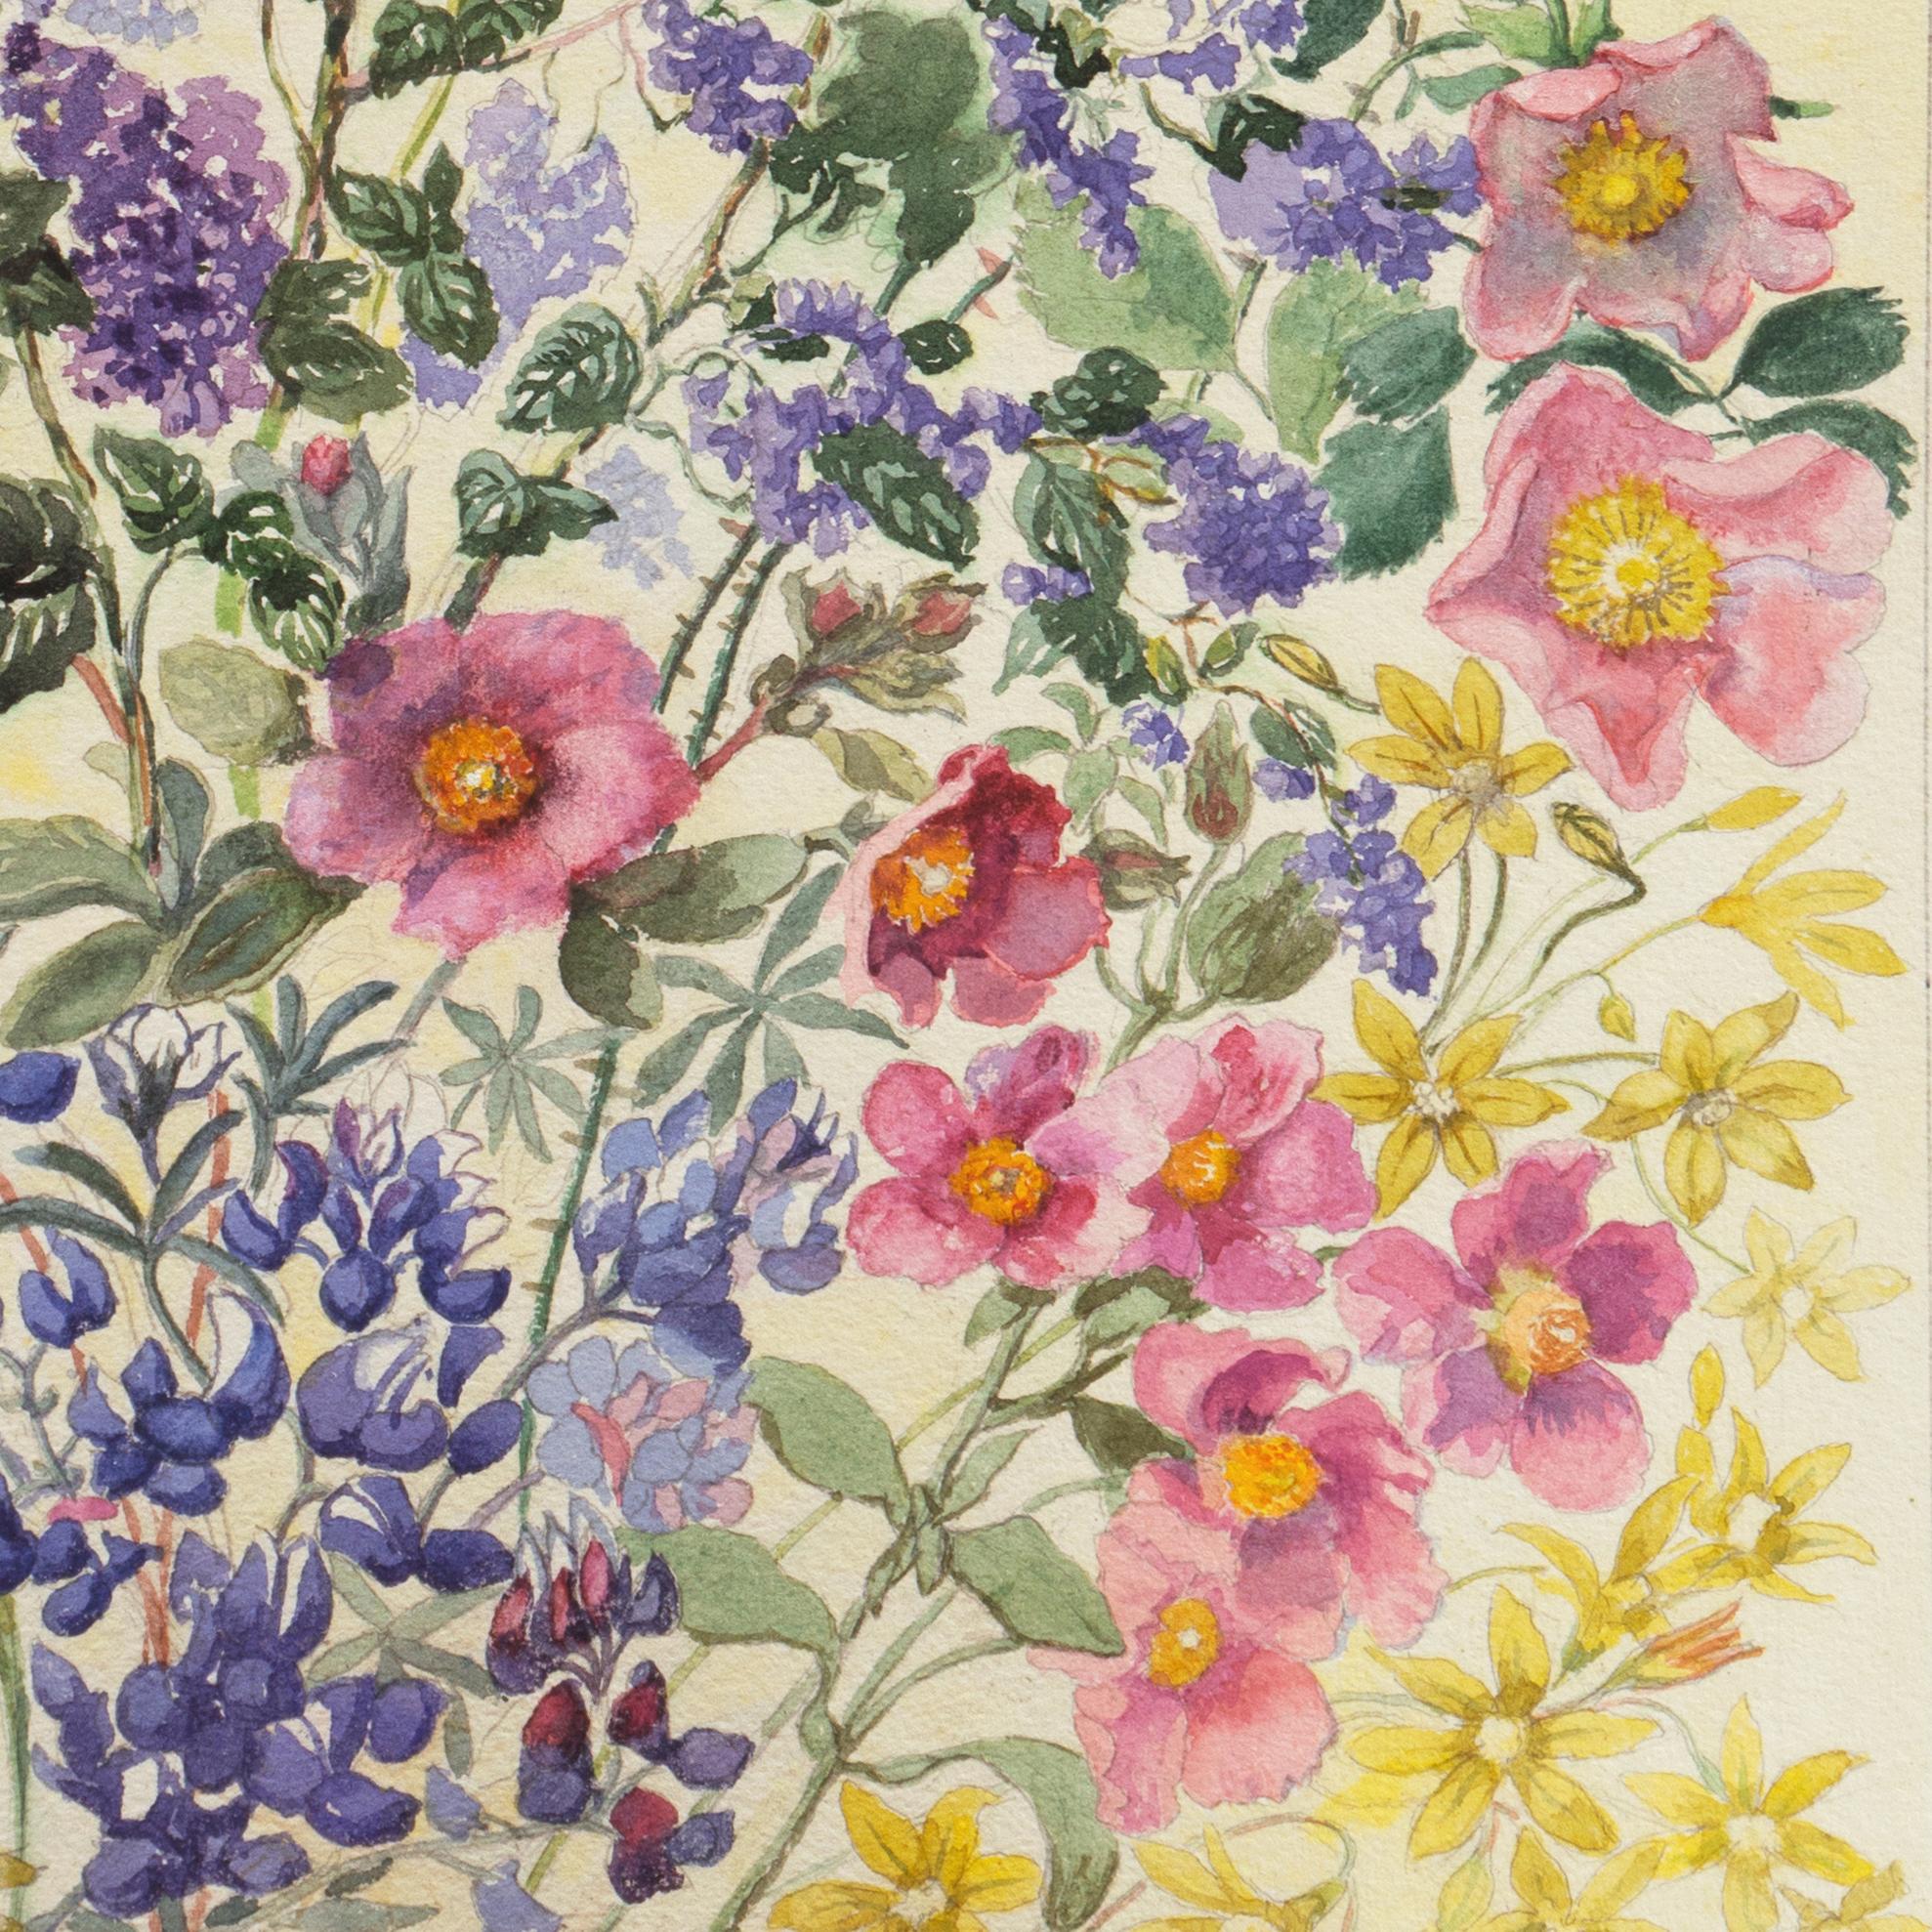 Signed lower right, 'Charlotte A. Morton' (American, 1885-1974) and painted circa 1955. 

A sensitive study of various blossoms including geraniums, lupin and catmint.

A landscape painter and teacher, Charlotte Augusta Morton graduated from Kansas